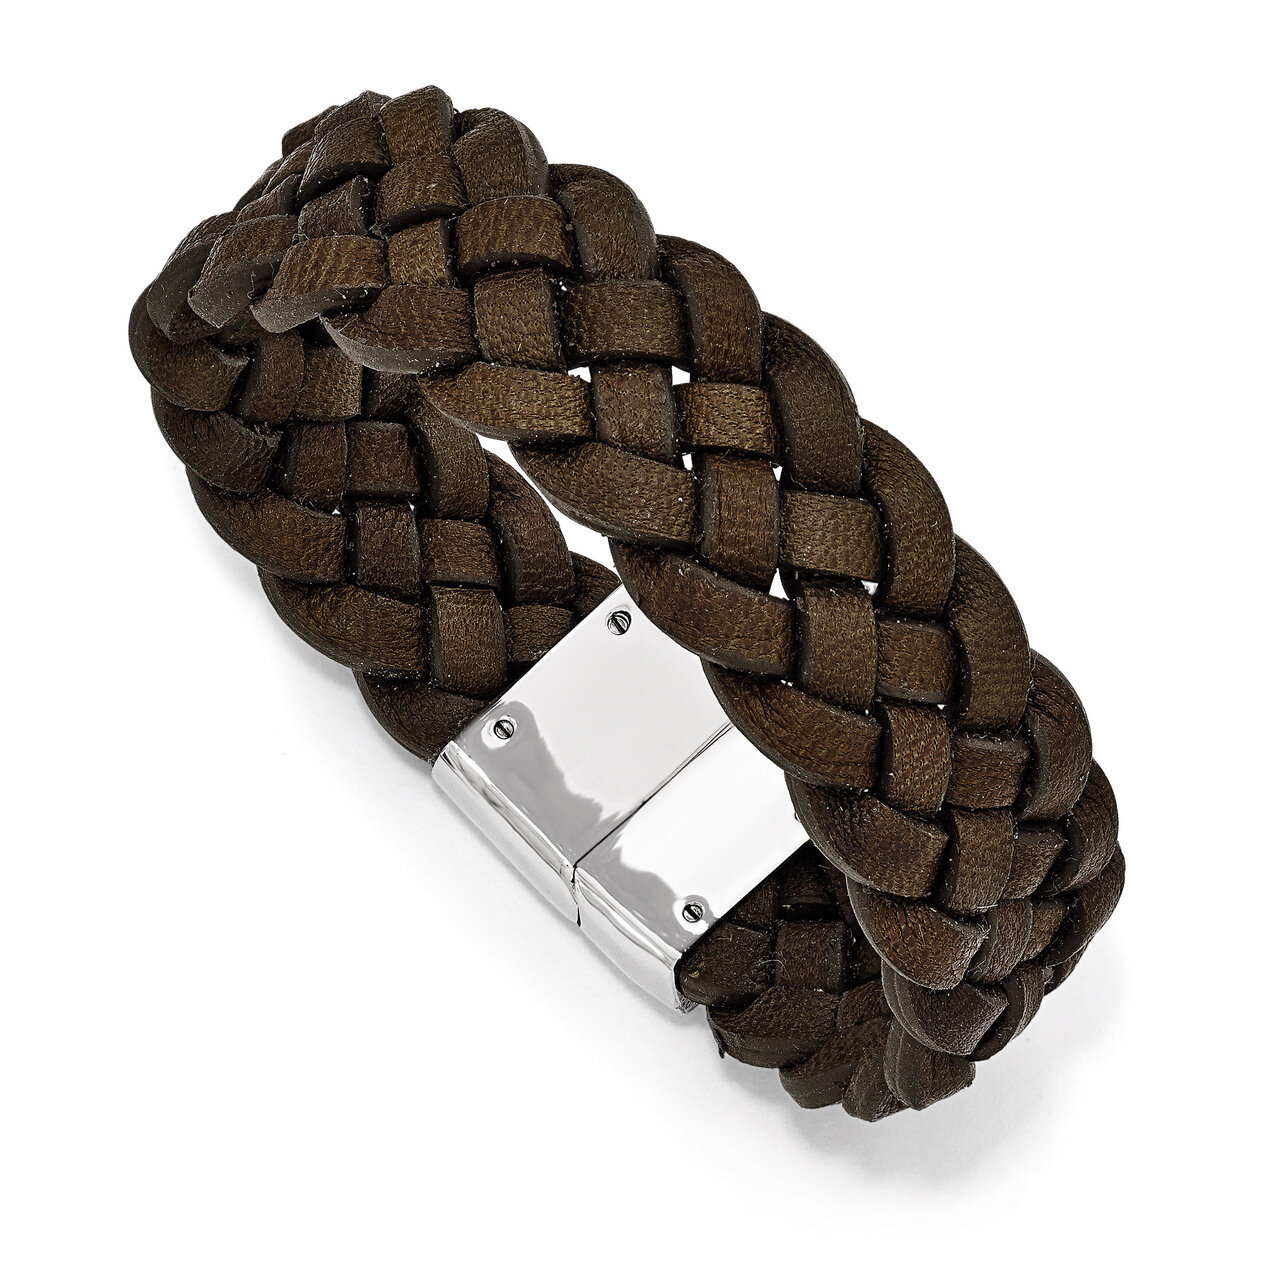 Polished Woven Brown Leather Bracelet - Stainless Steel SRB1627-8.75